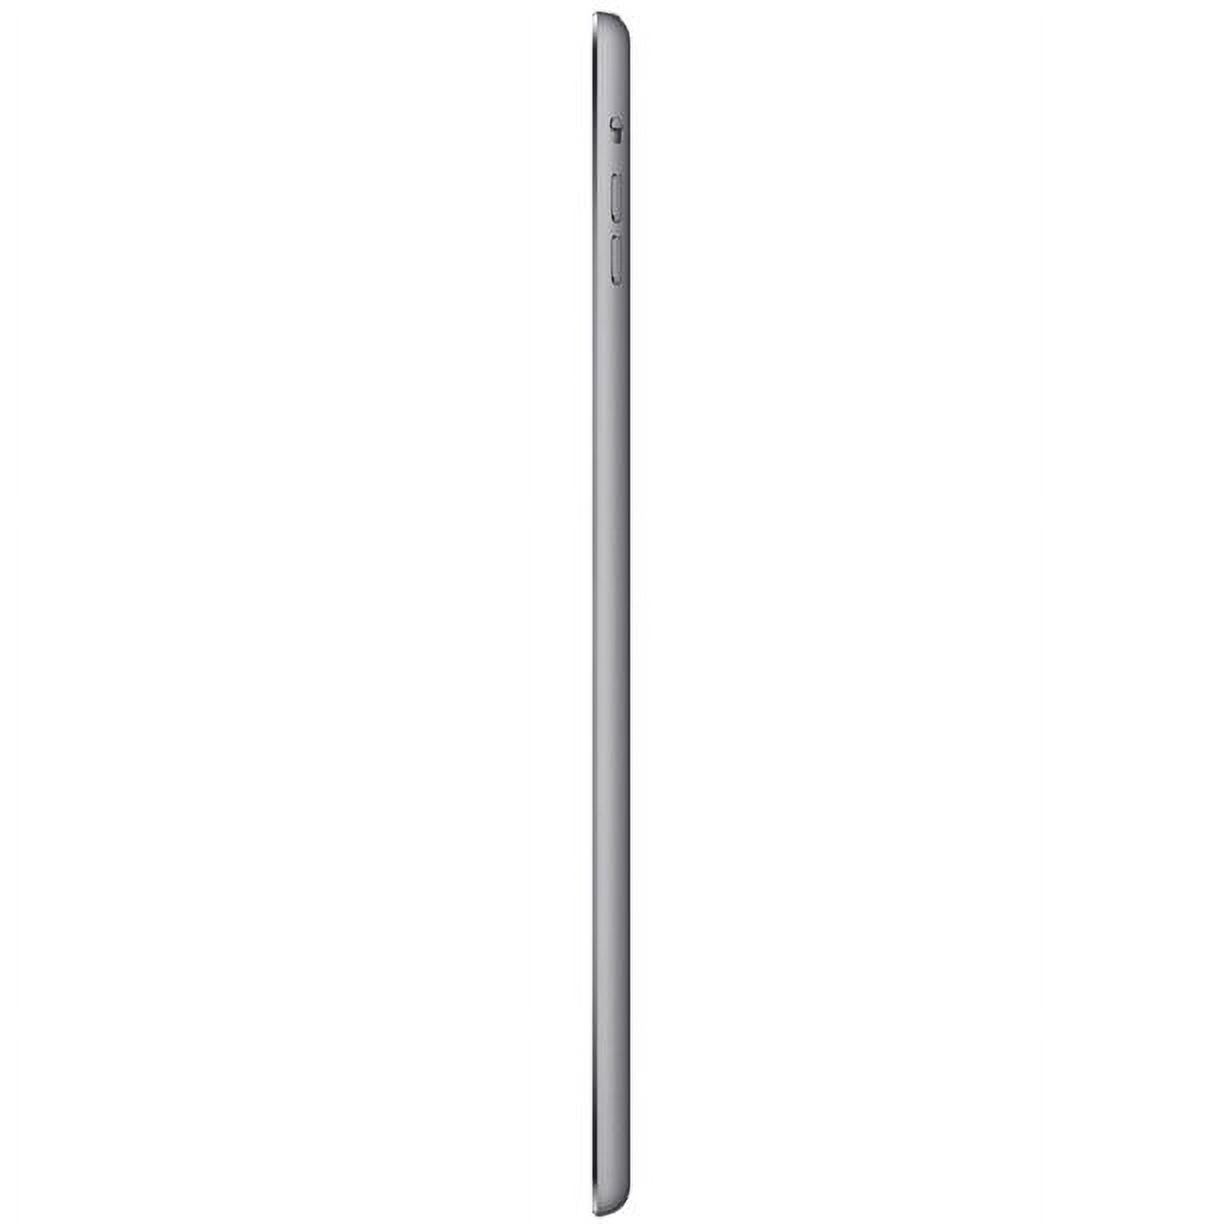 Apple iPad Air ME993LL/A Tablet, 9.7" QXGA, Apple A7, 16 GB Storage, iOS 7, Space Gray - image 3 of 5